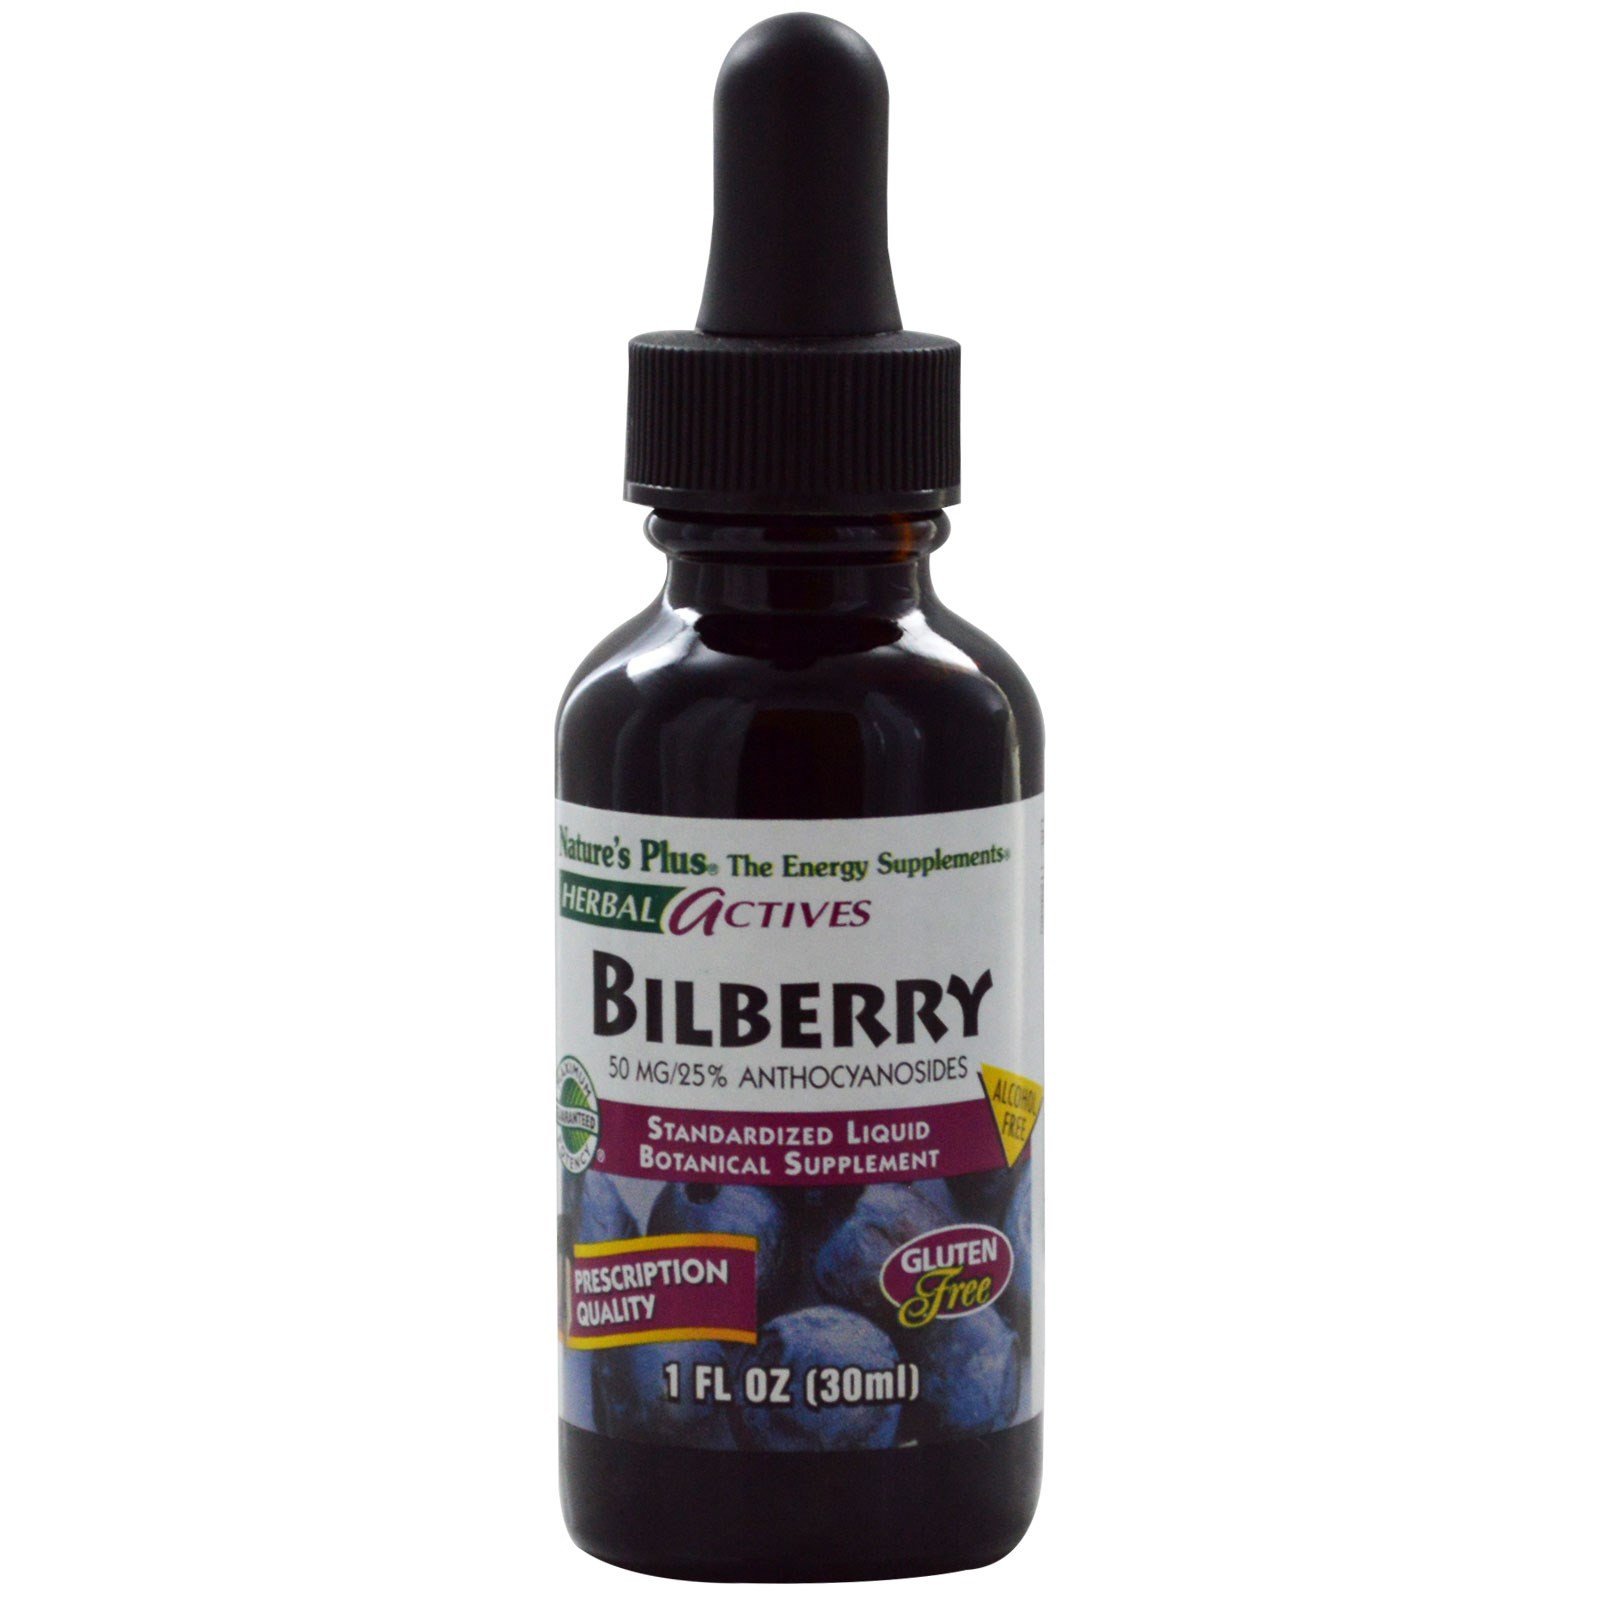 Natures Plus HerbalActives Liquid Bilberry Extract A/F (50 mg), 30 ml